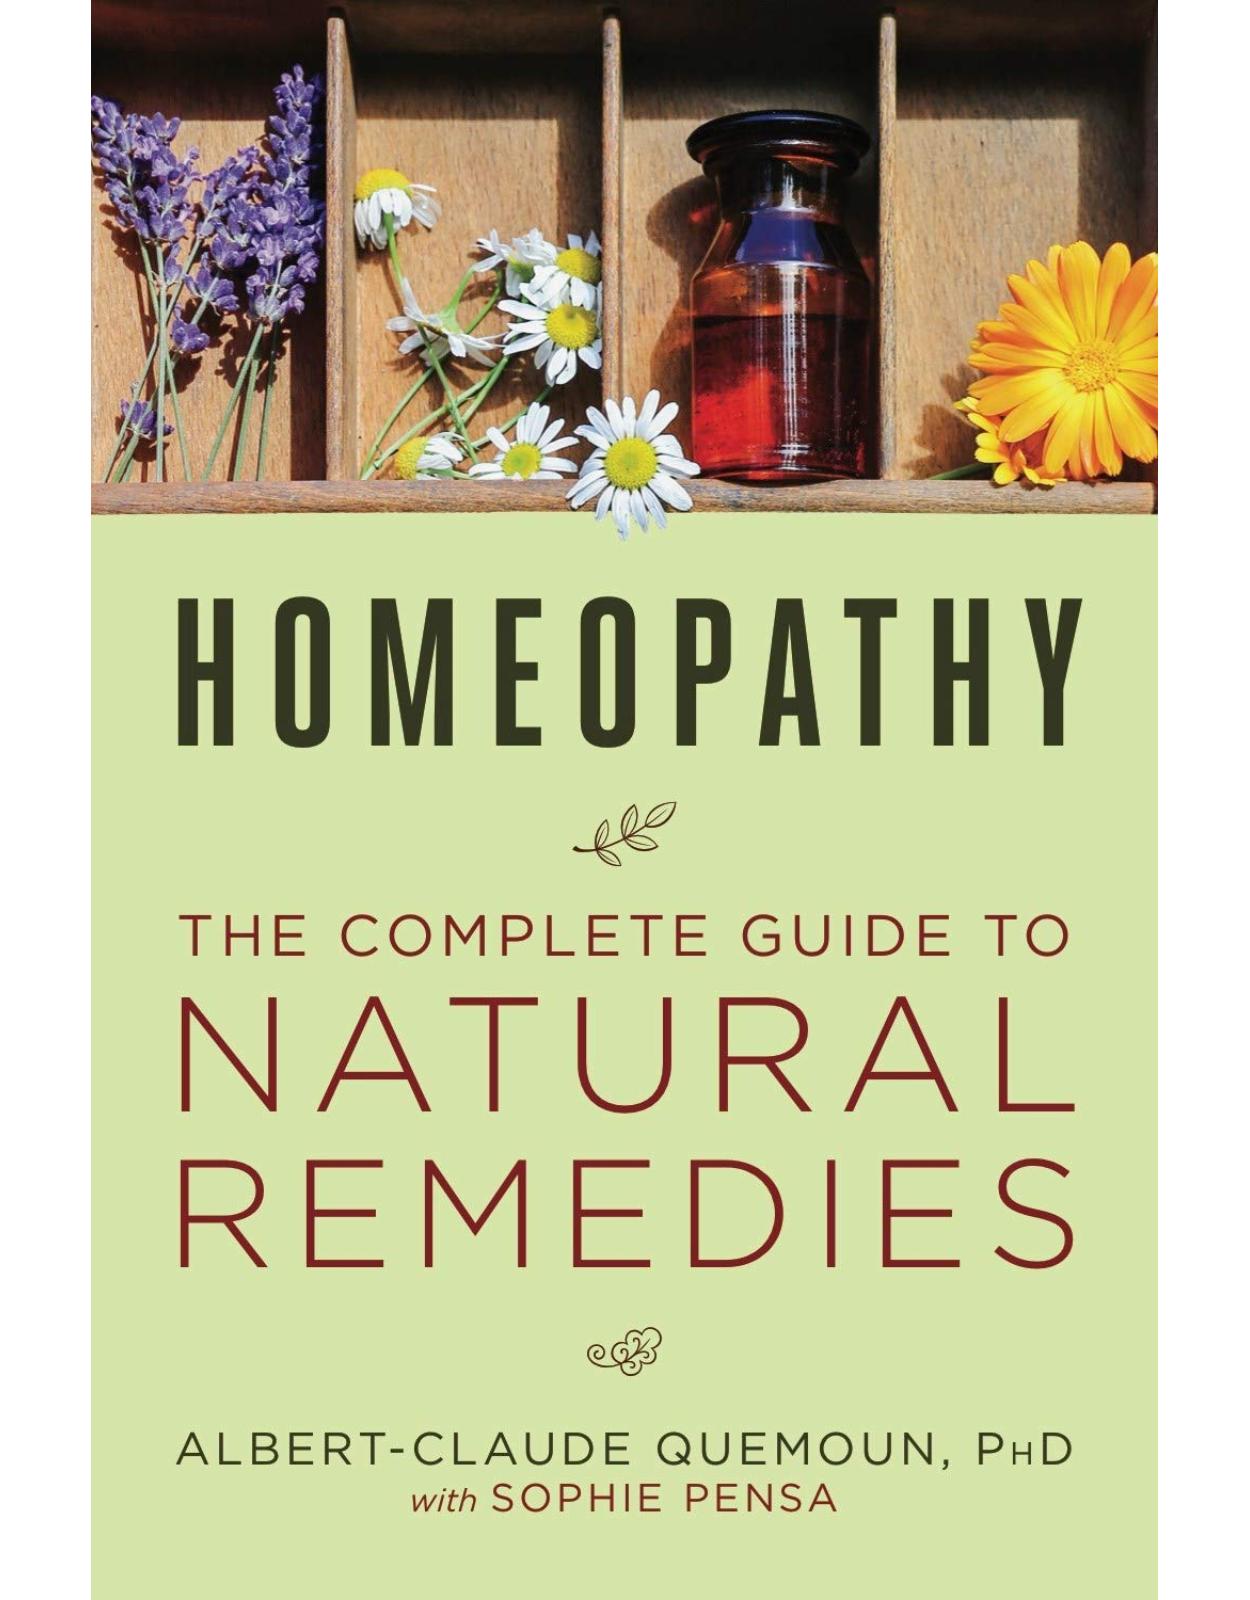 Homeopathy: The Complete Guide to Natural Remedies